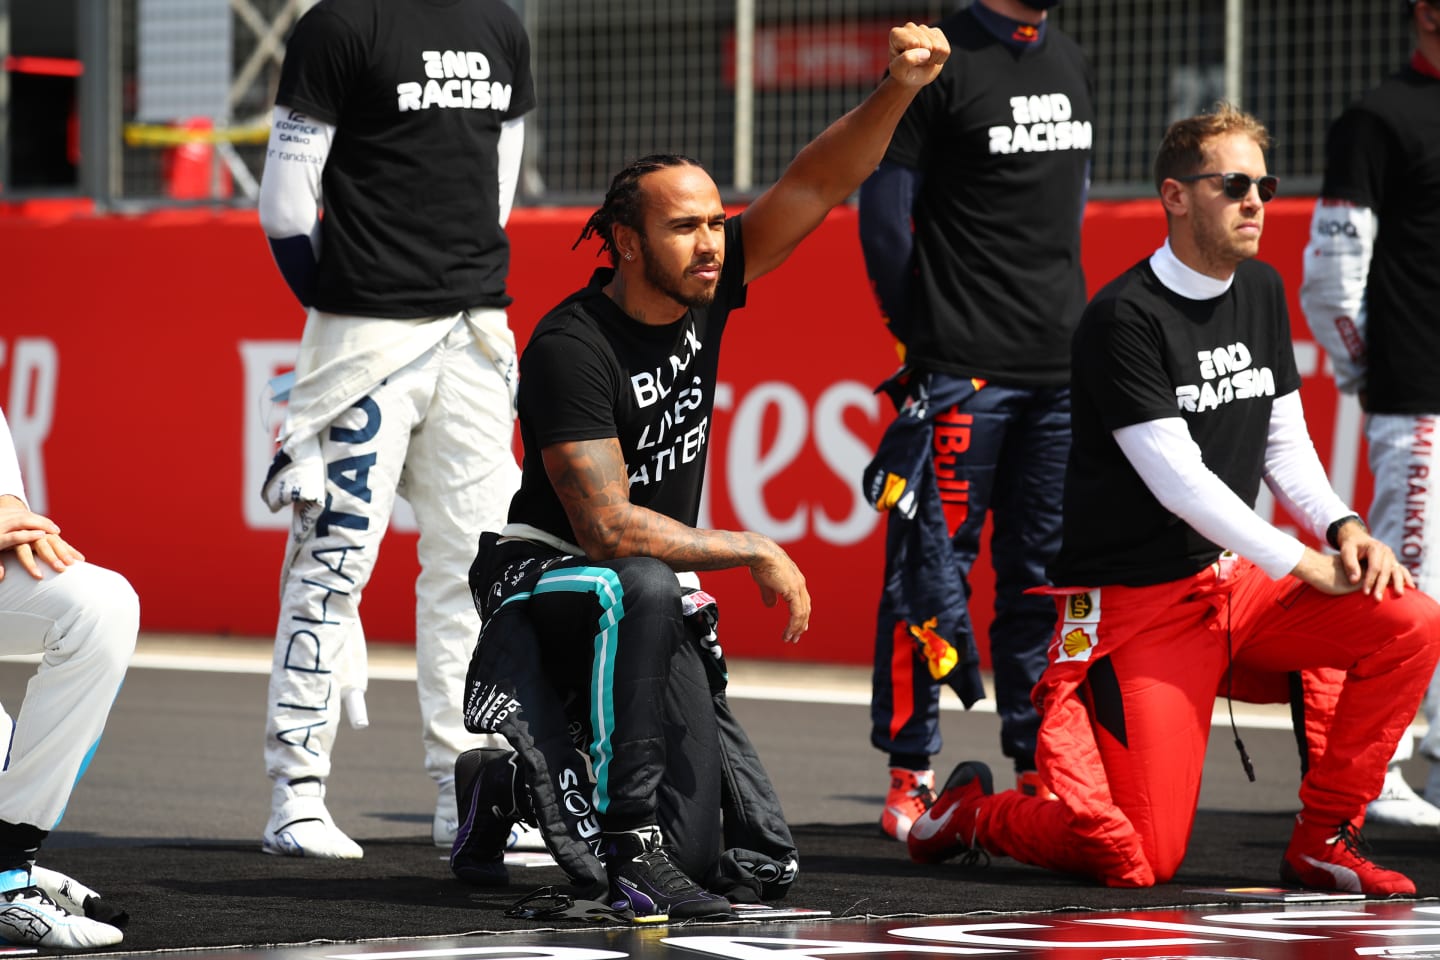 NORTHAMPTON, ENGLAND - AUGUST 09: Lewis Hamilton of Great Britain and Mercedes GP takes a knee on